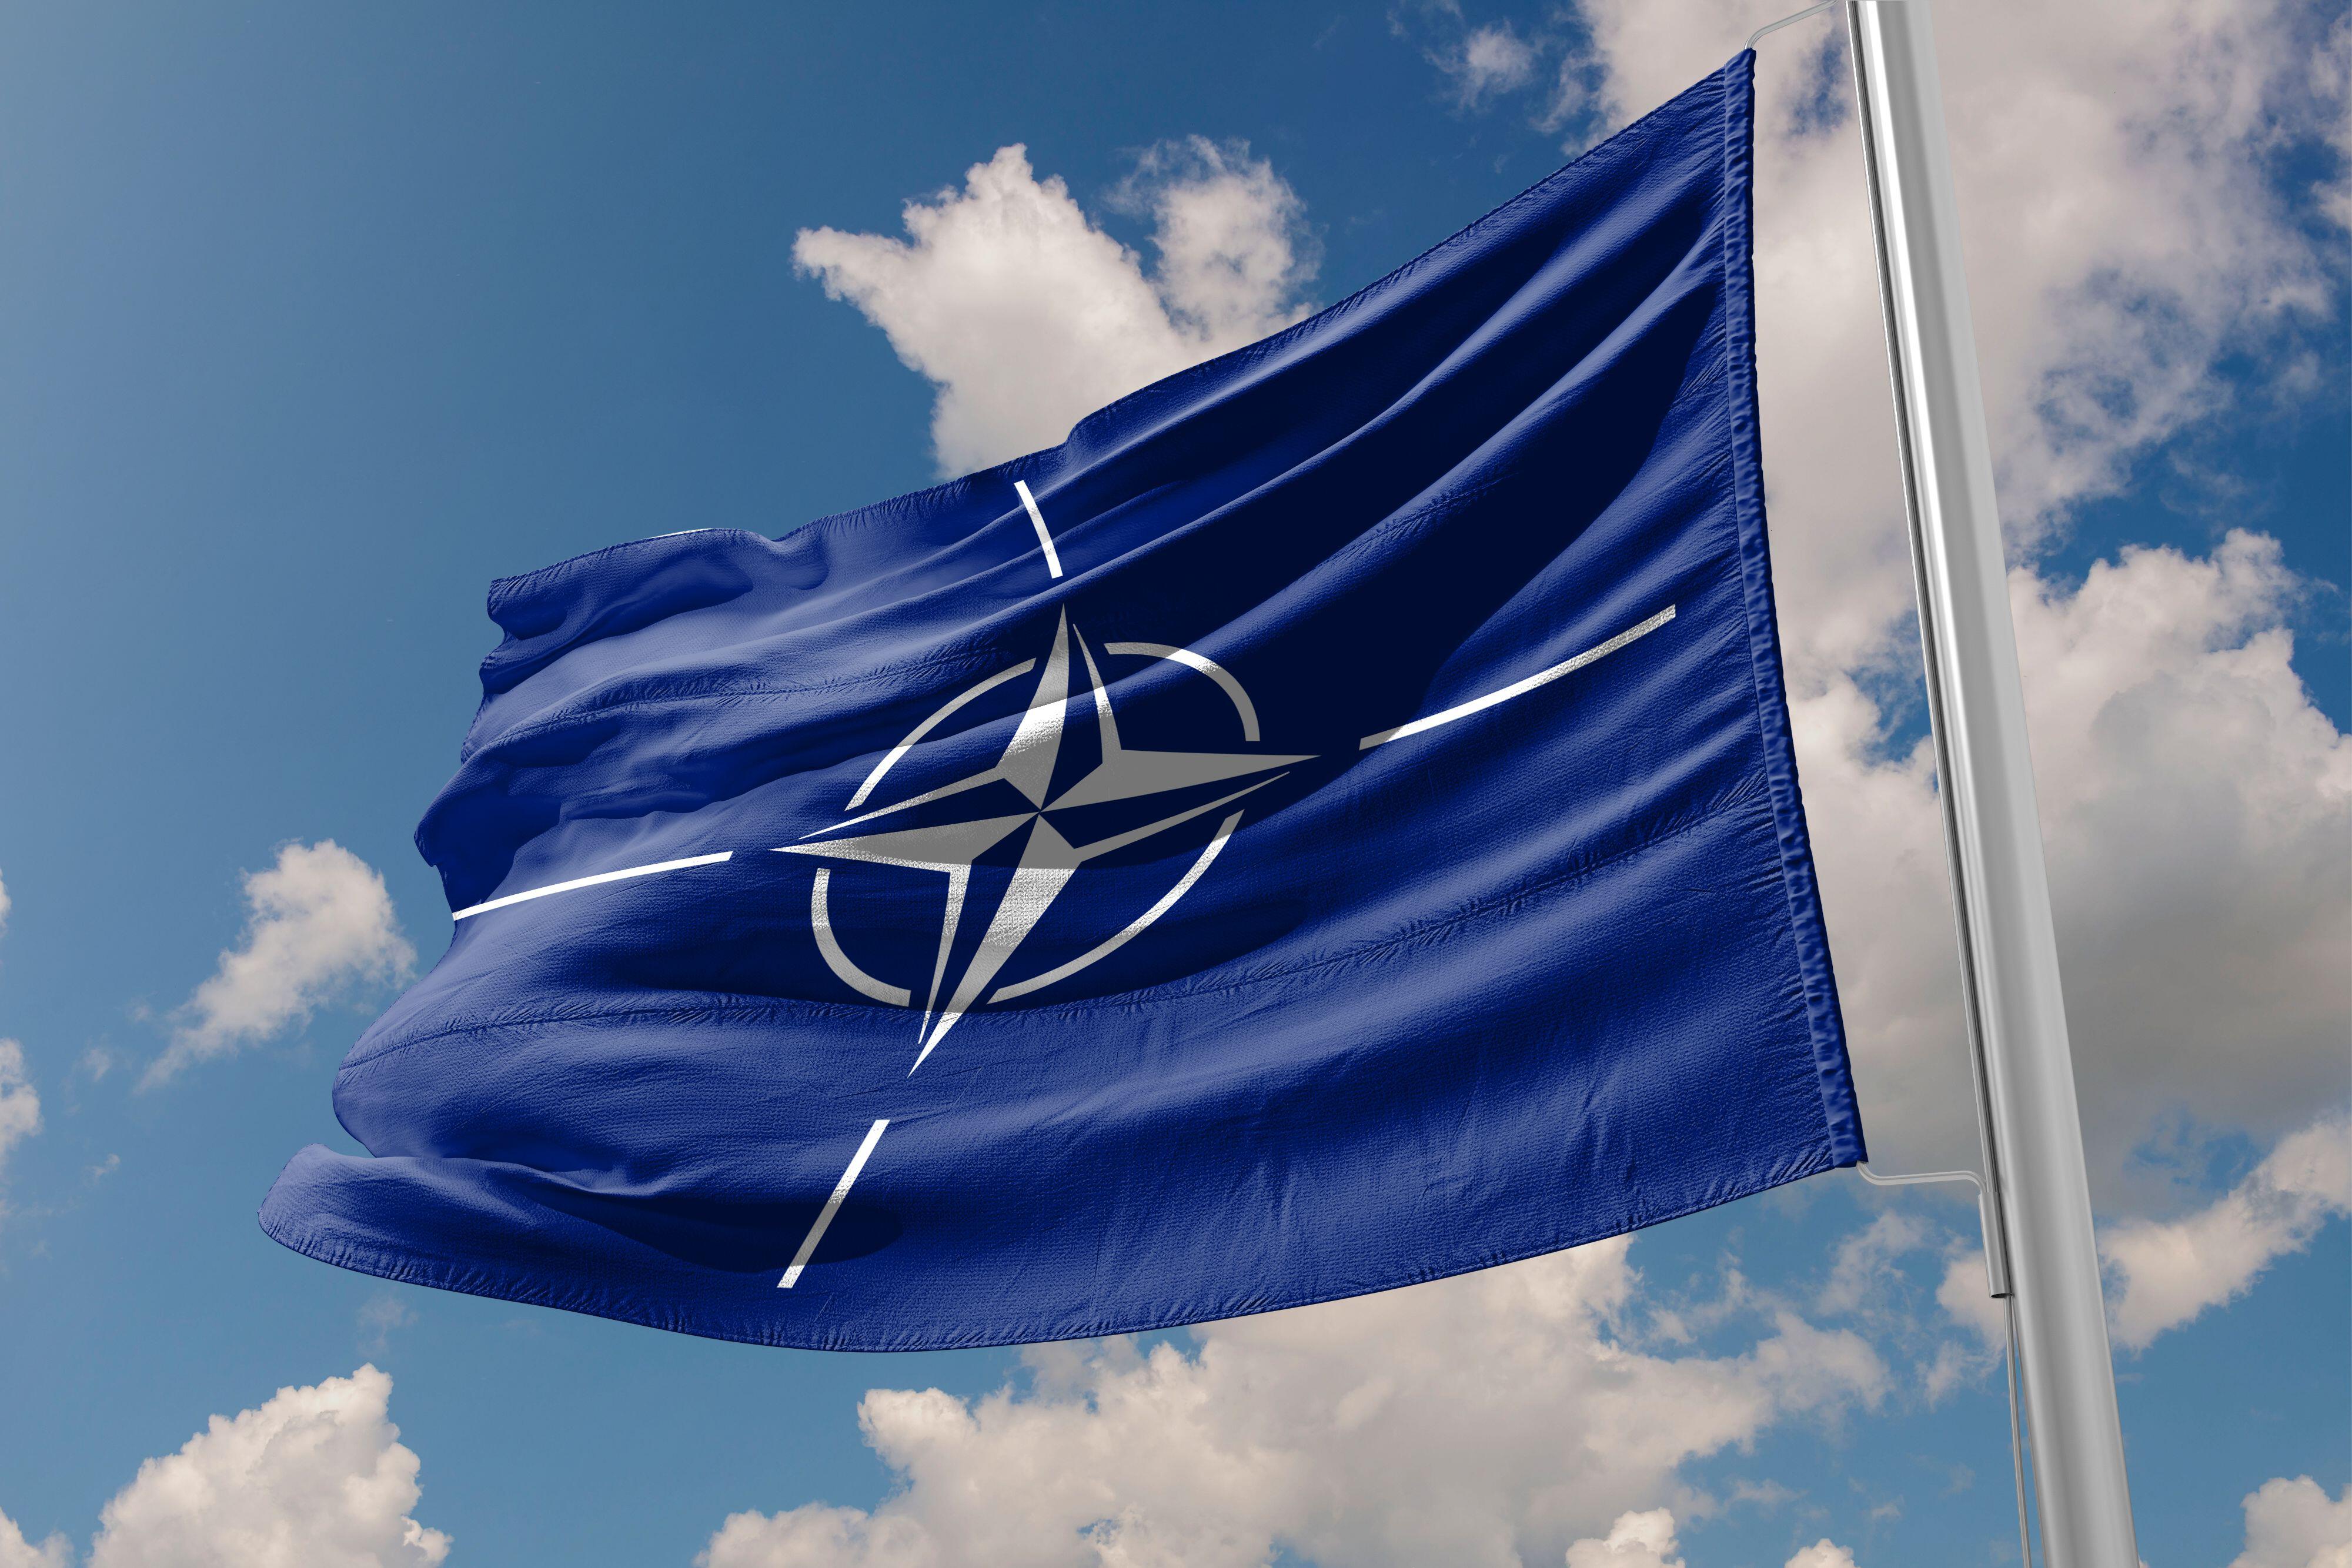 From Dark Reading – It’s Time to Establish the NATO of Cybersecurity